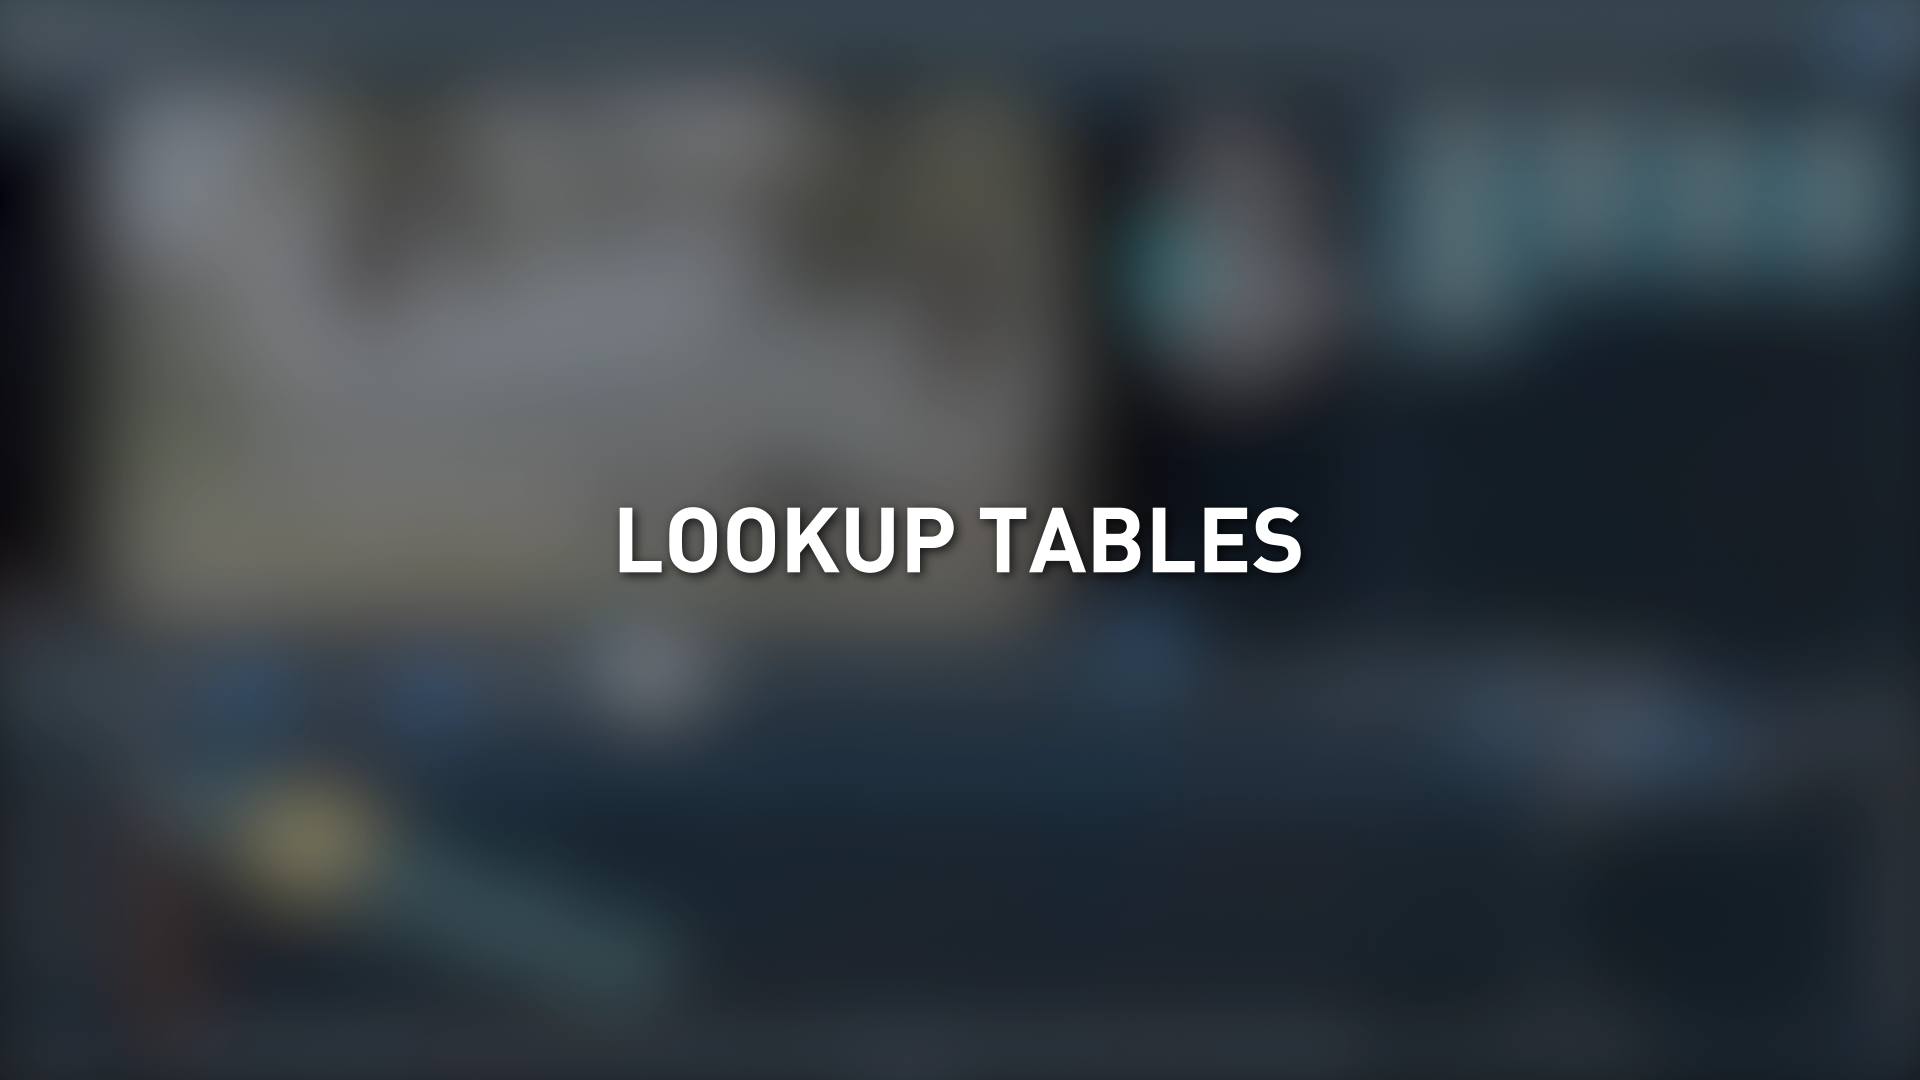 Lookup tables